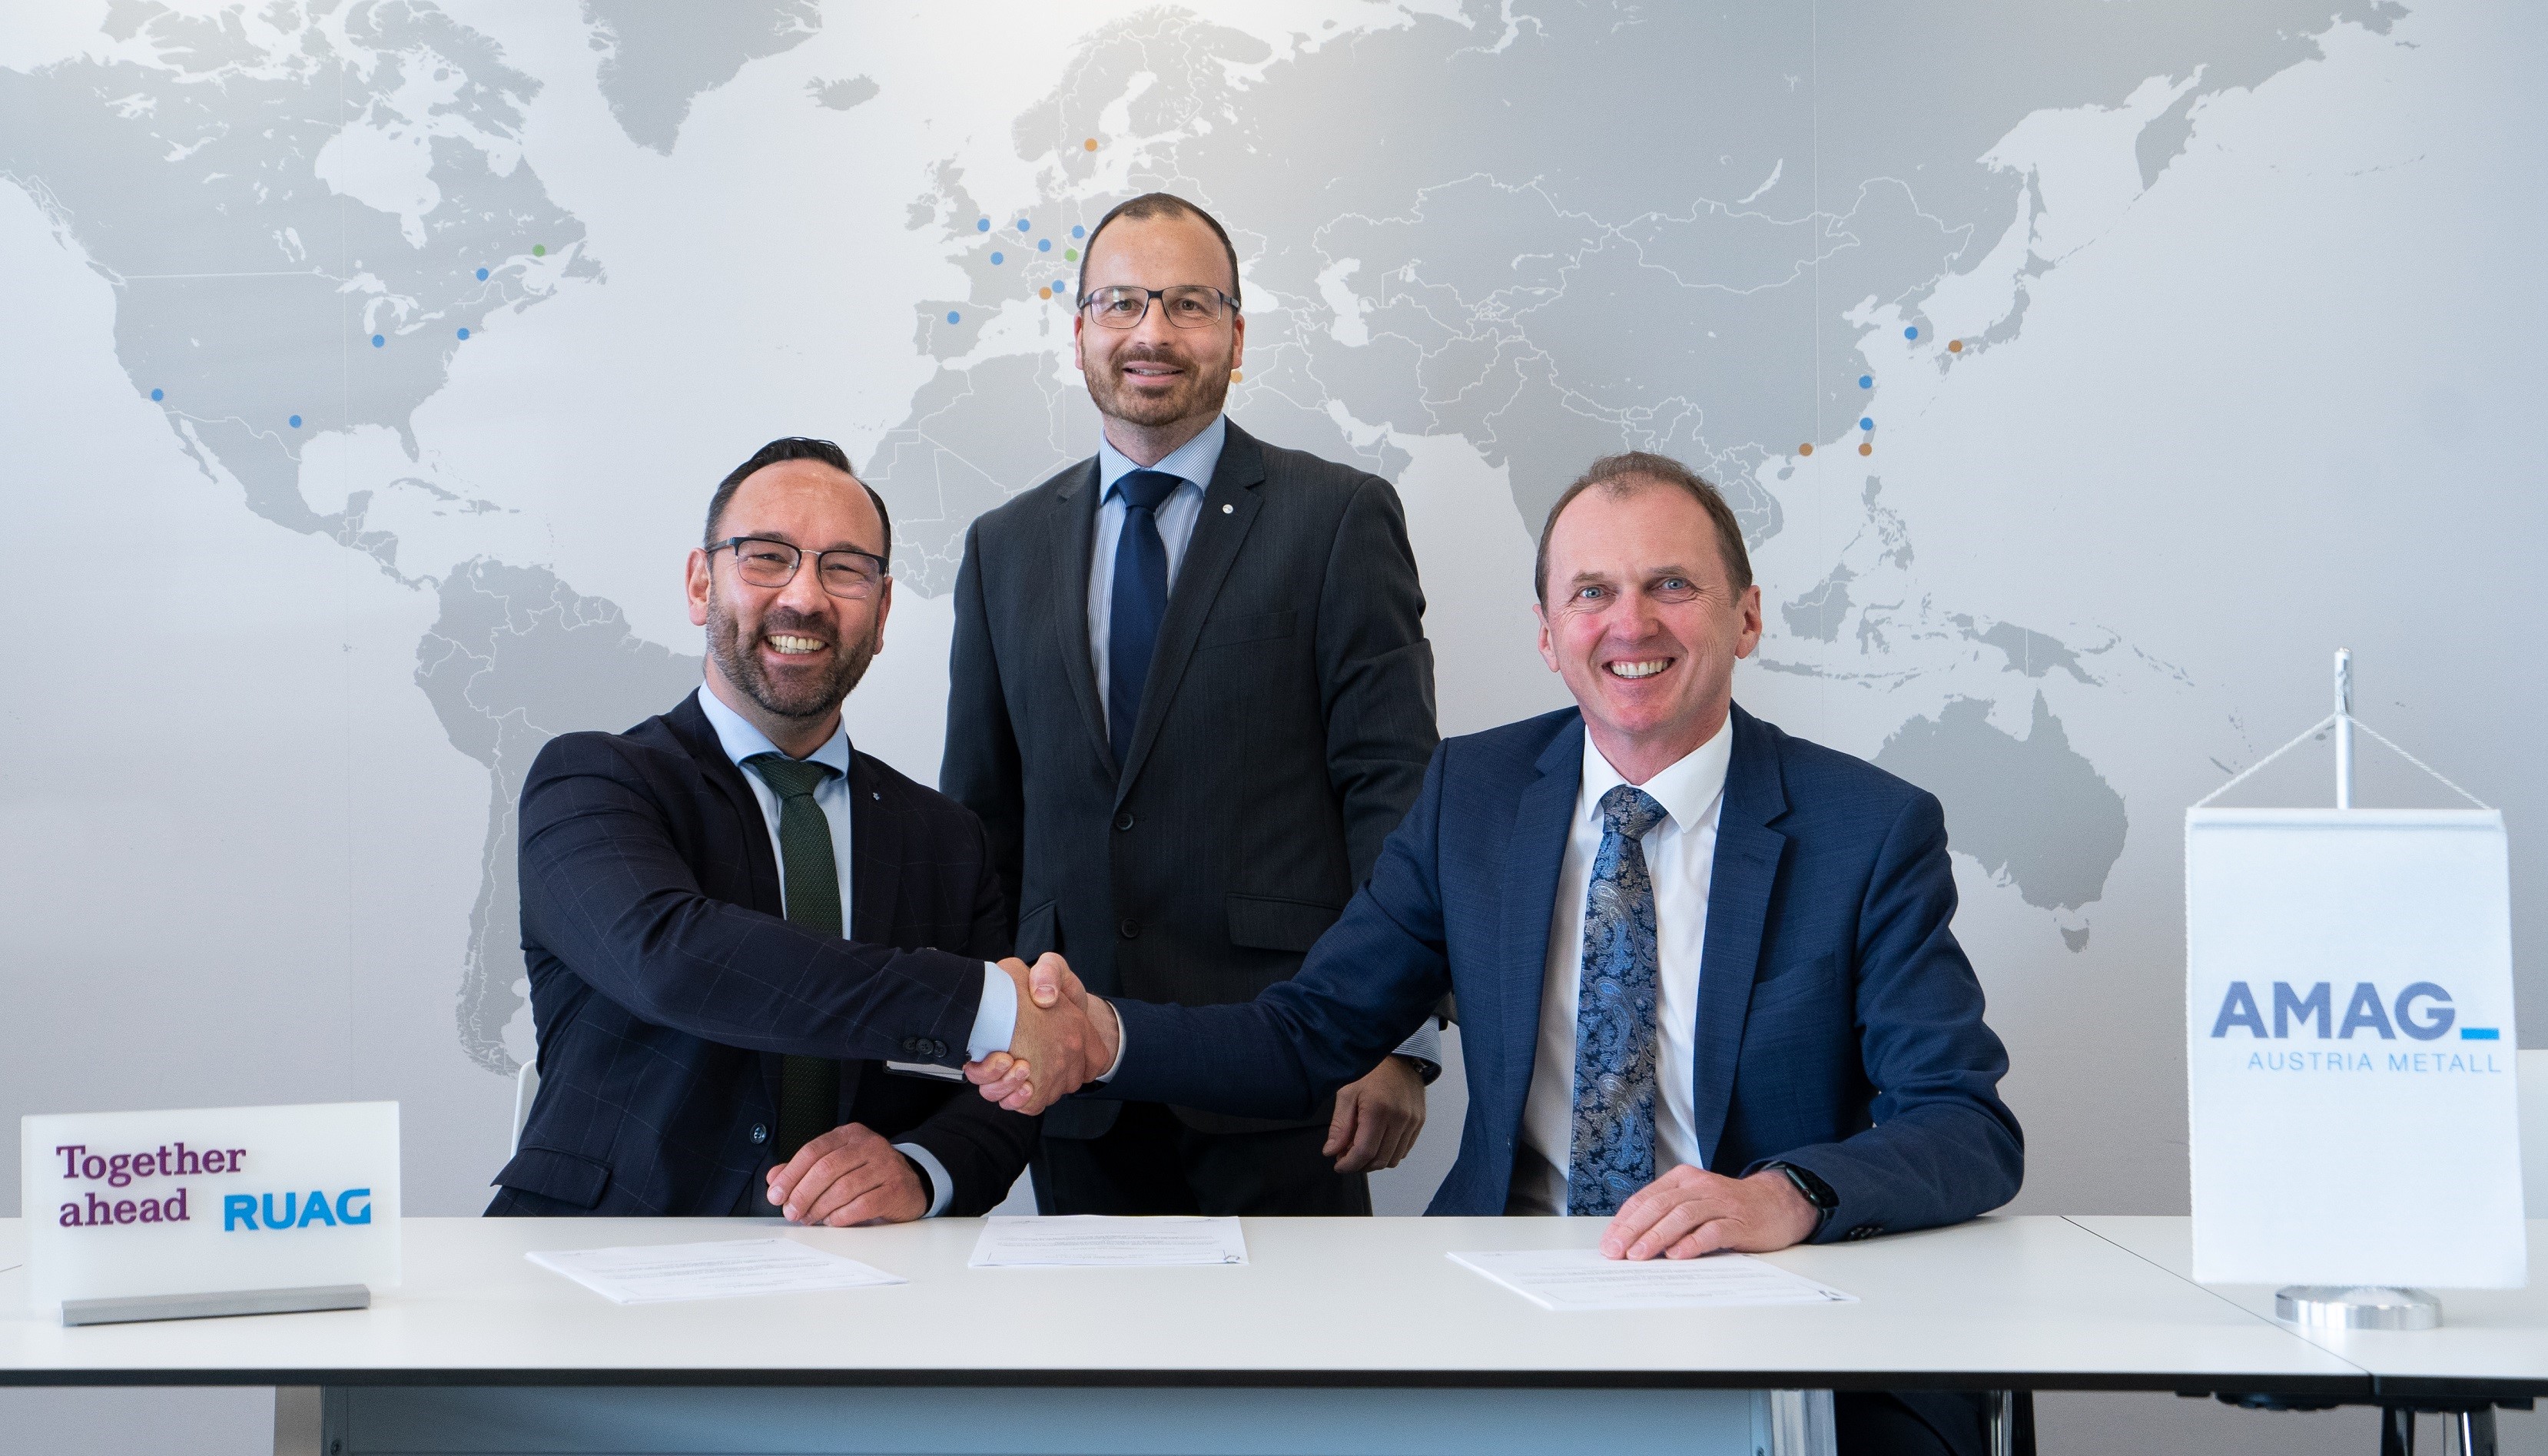 AMAG secures multi-year complex component orders from Ruag Aerostructures